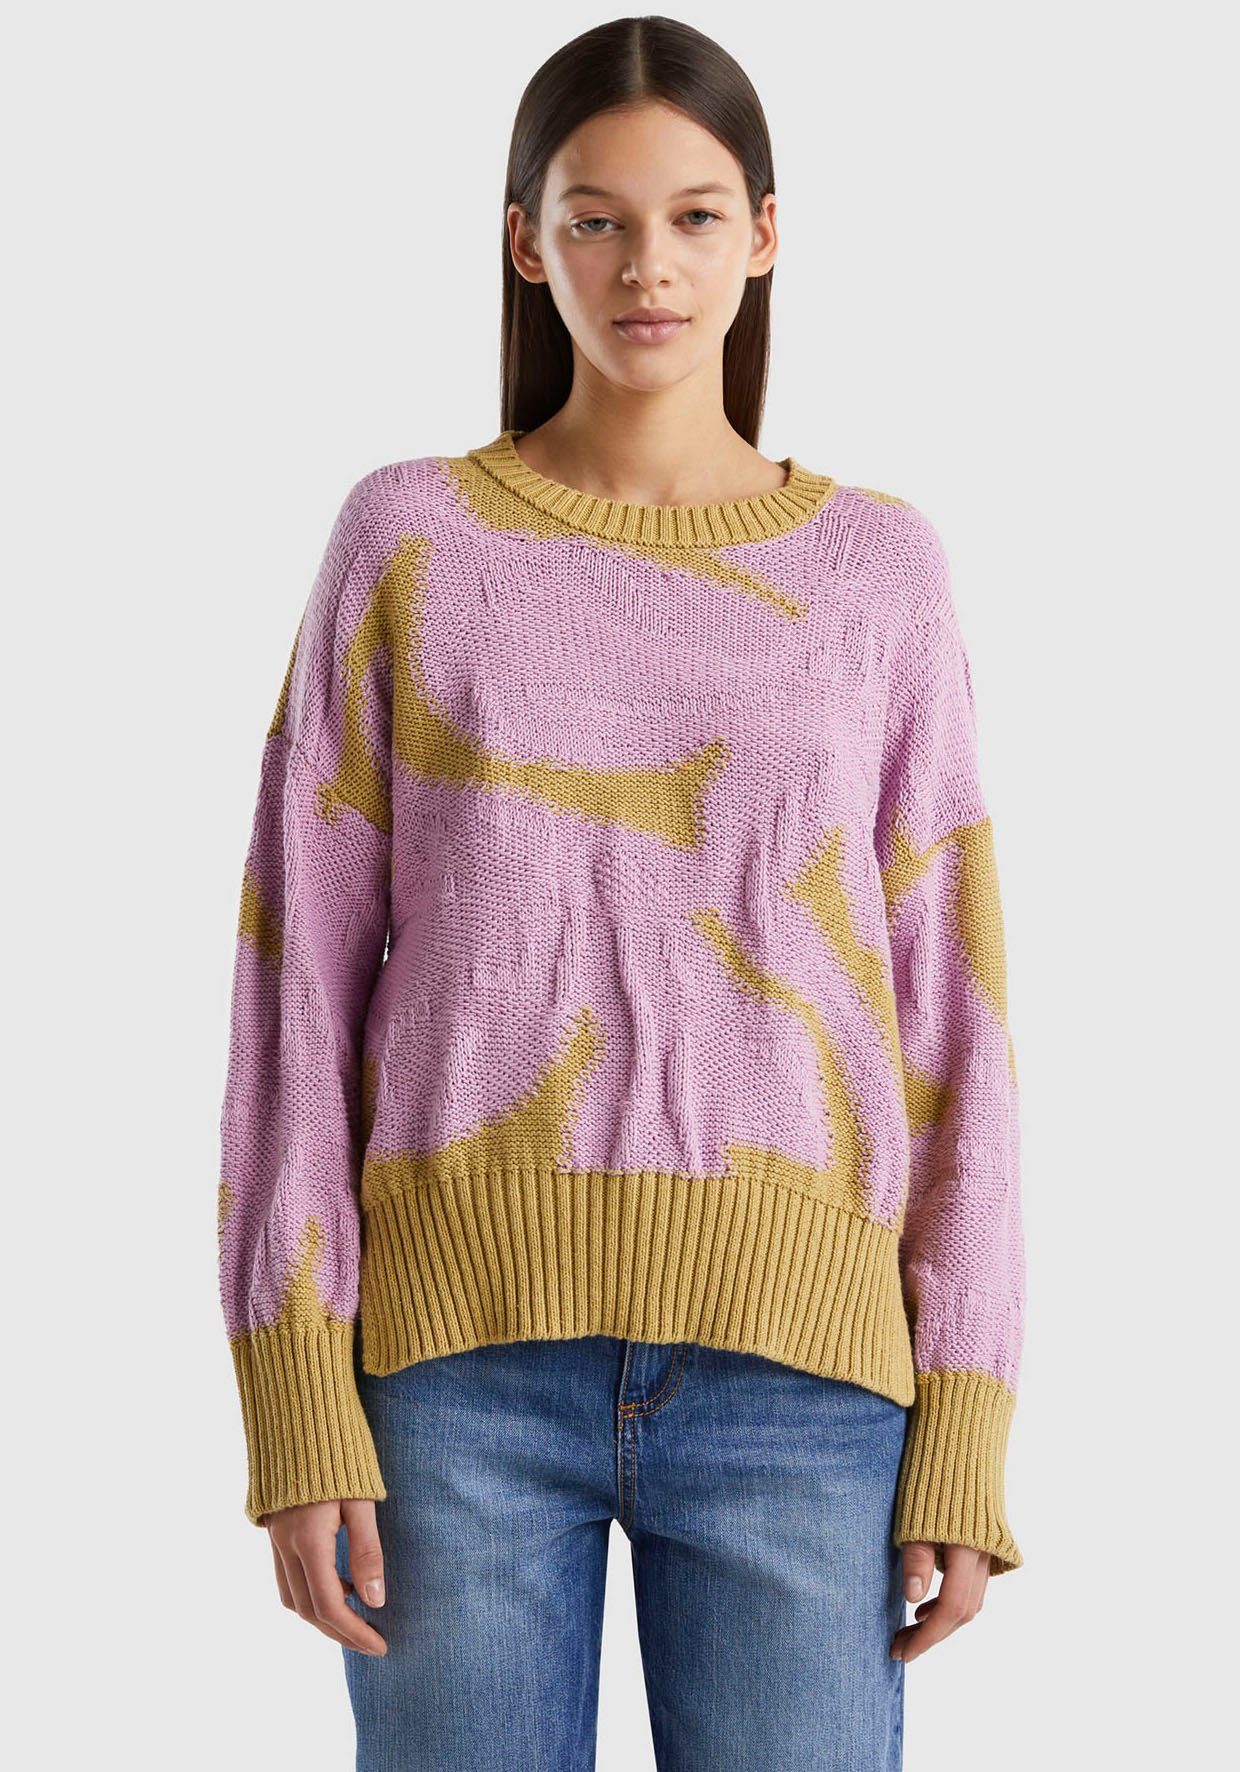 of of Benetton Colors Benetton von United Pullover Strickpullover, United Colors